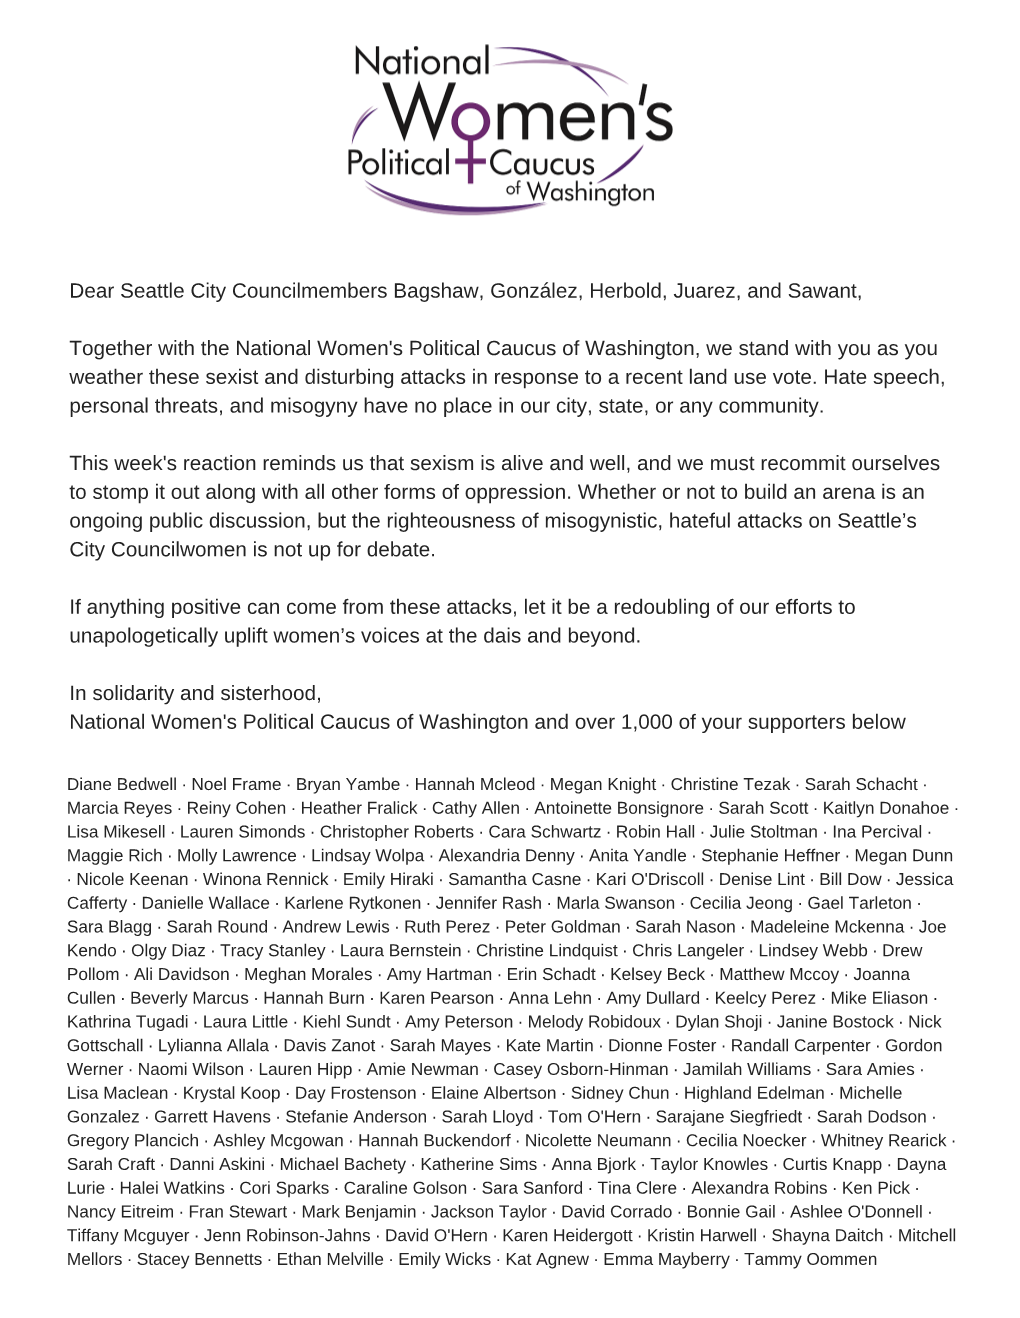 Seattle City Council Letter of Support